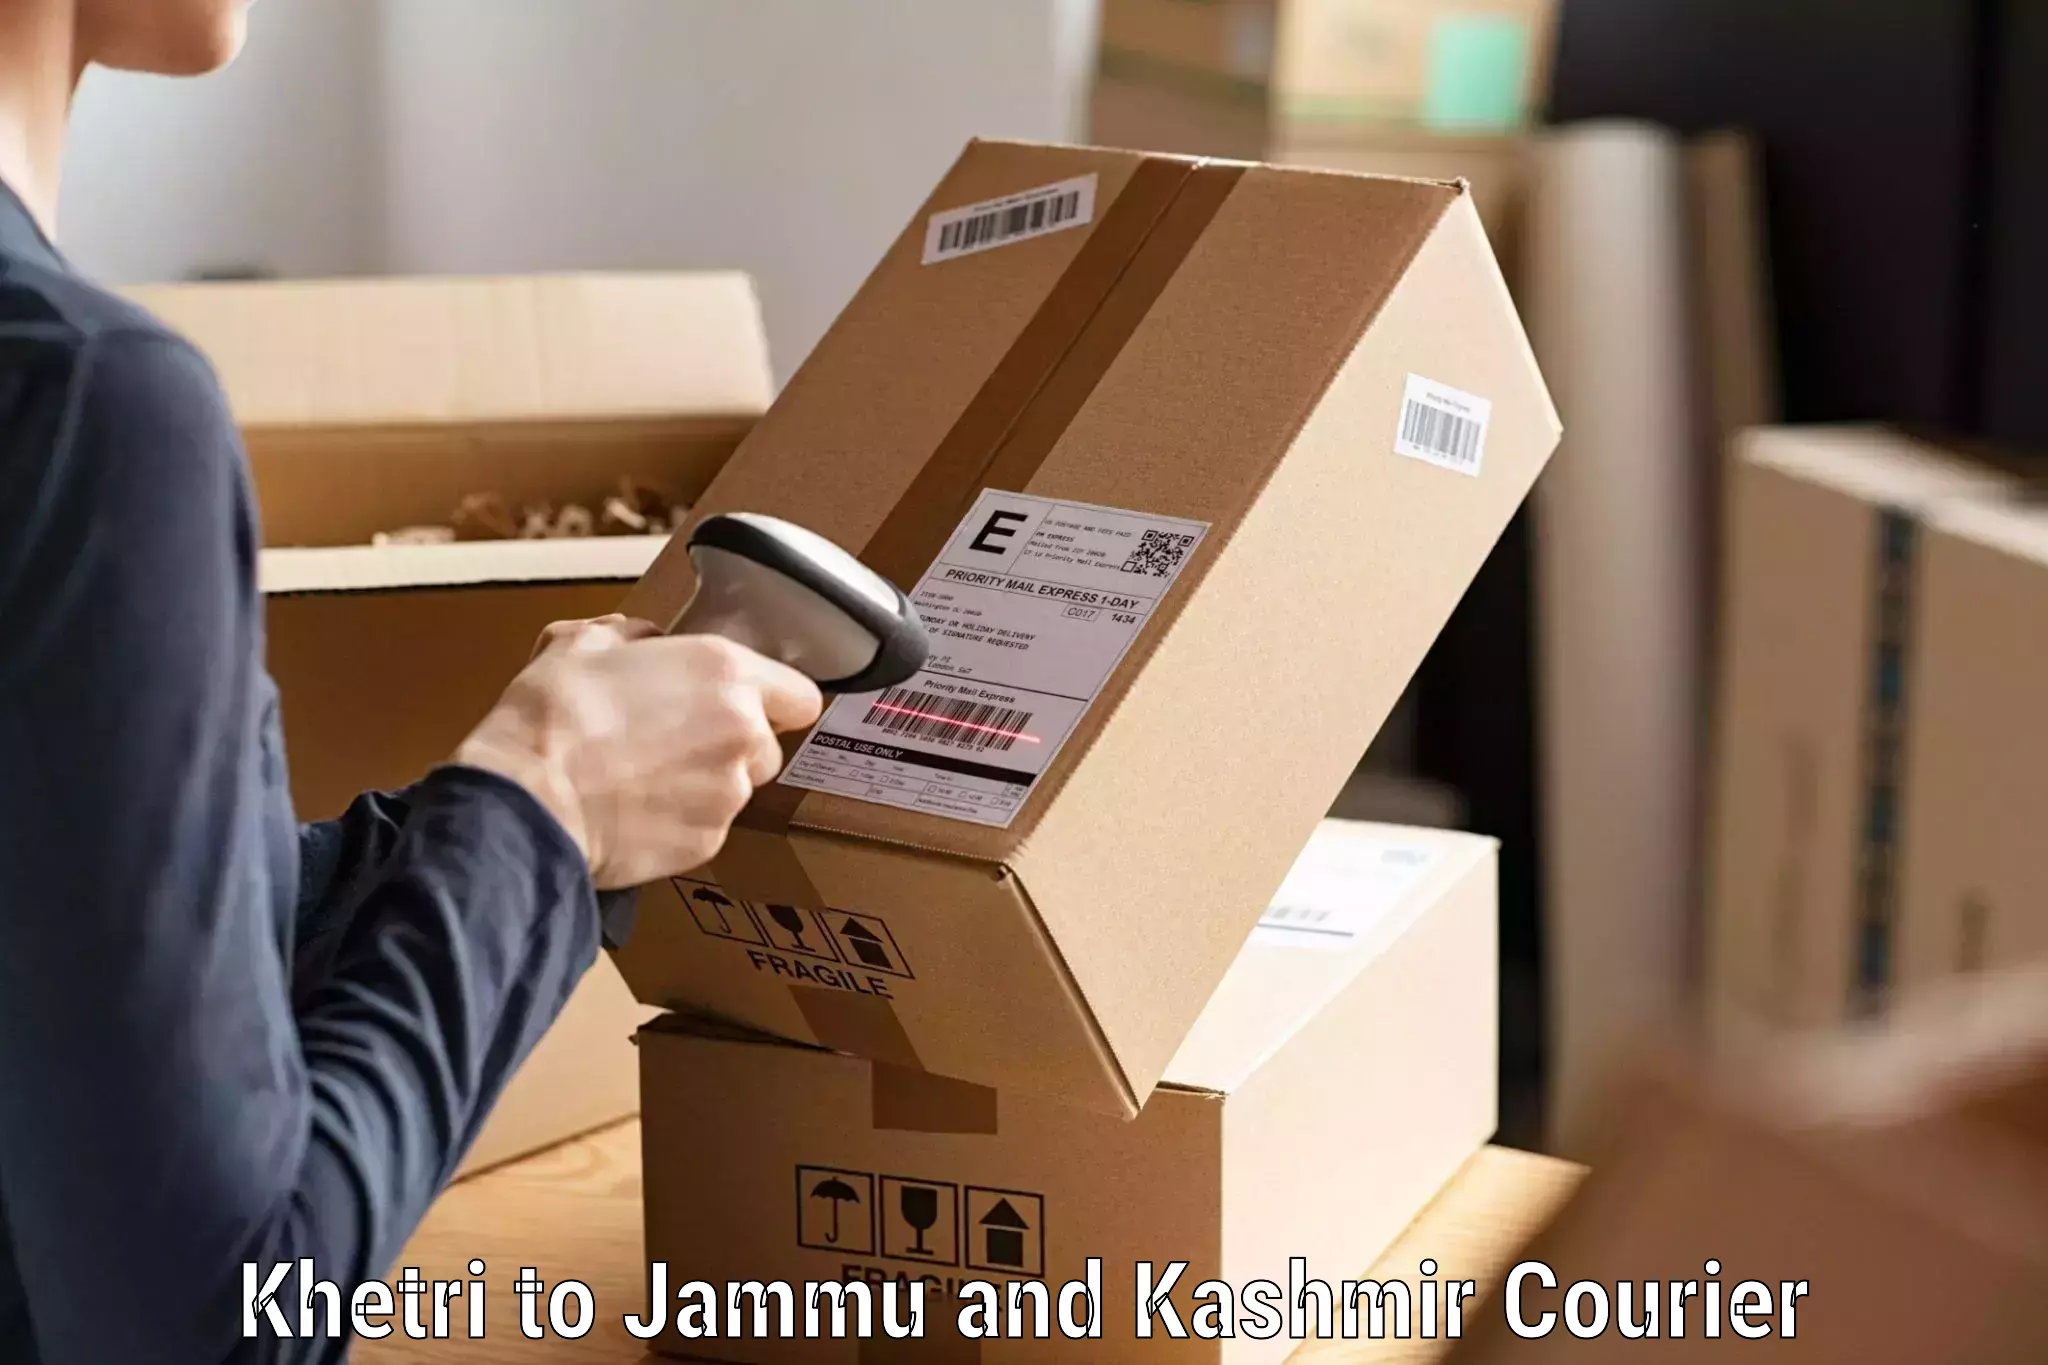 Courier service efficiency in Khetri to Jakh